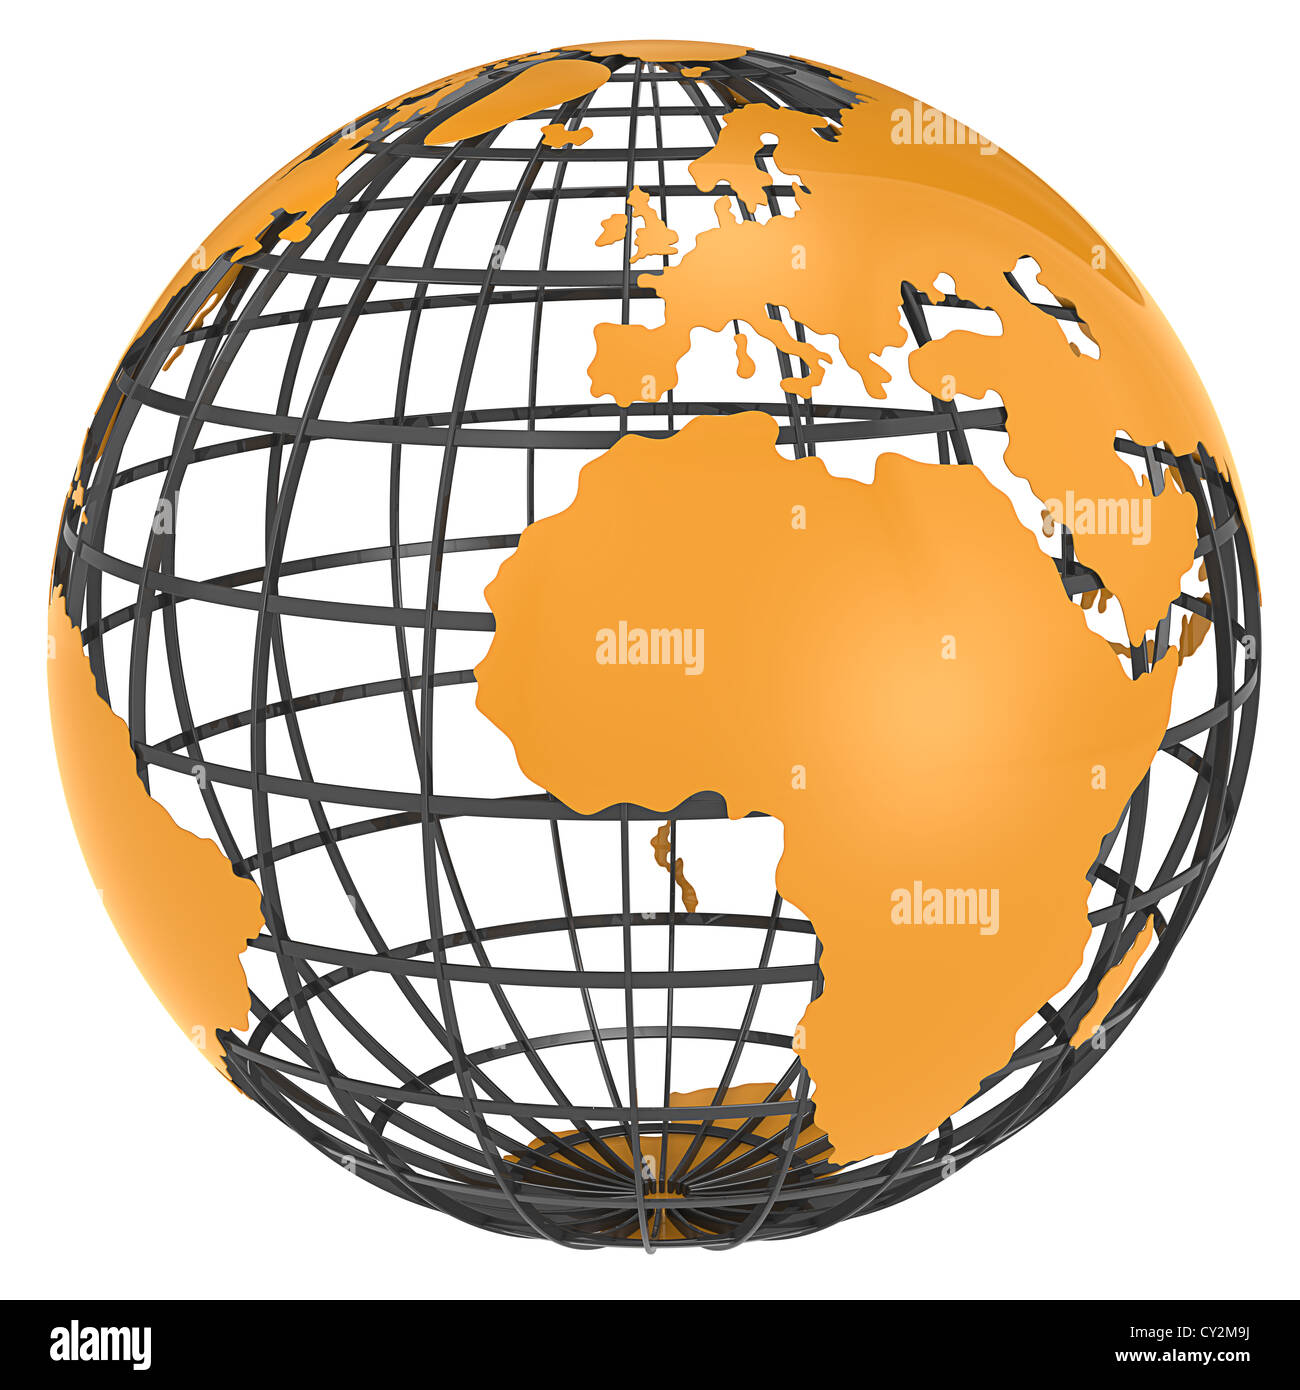 The Earth, Black frame structure. Orange continents. Isolated. Stock Photo